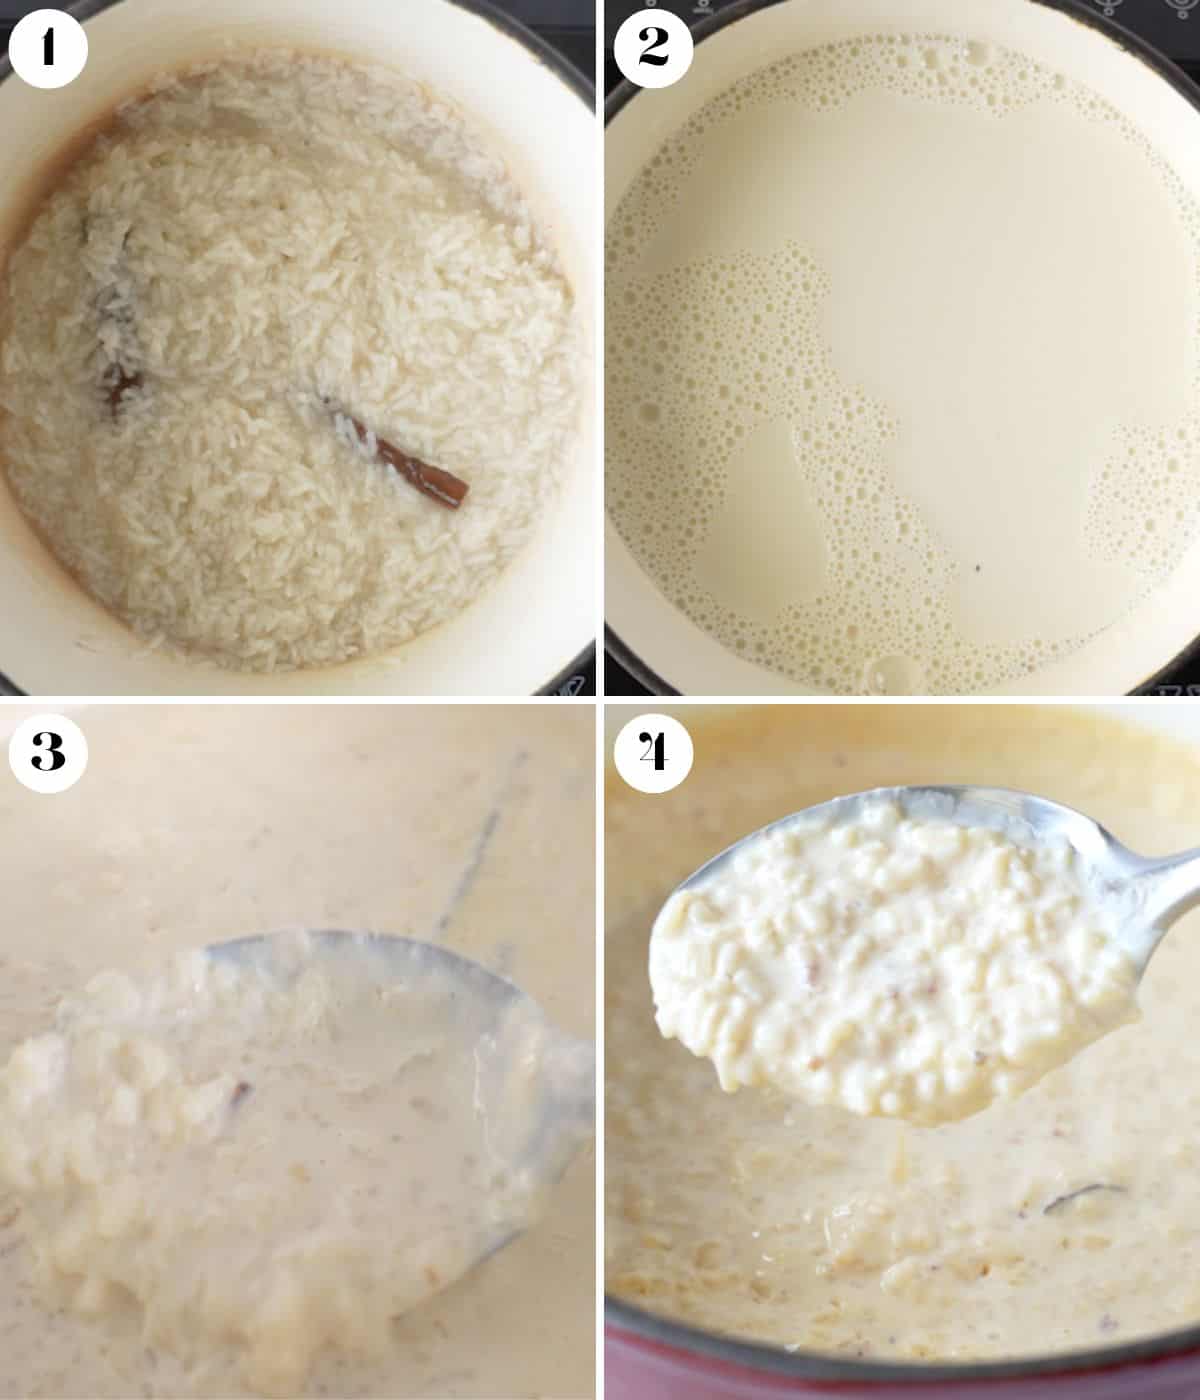 Collage showing the steps for making rice pudding.